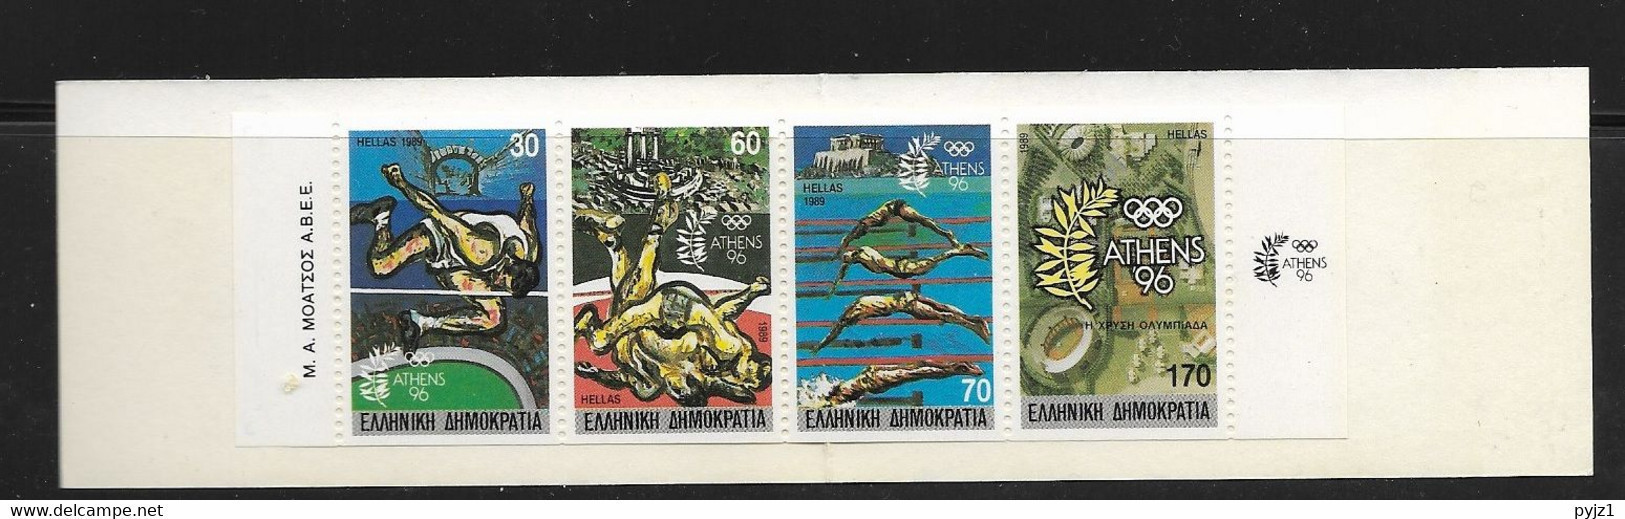 1989 MNH  Greece, Booklet Olympic Games  MH11 - Markenheftchen